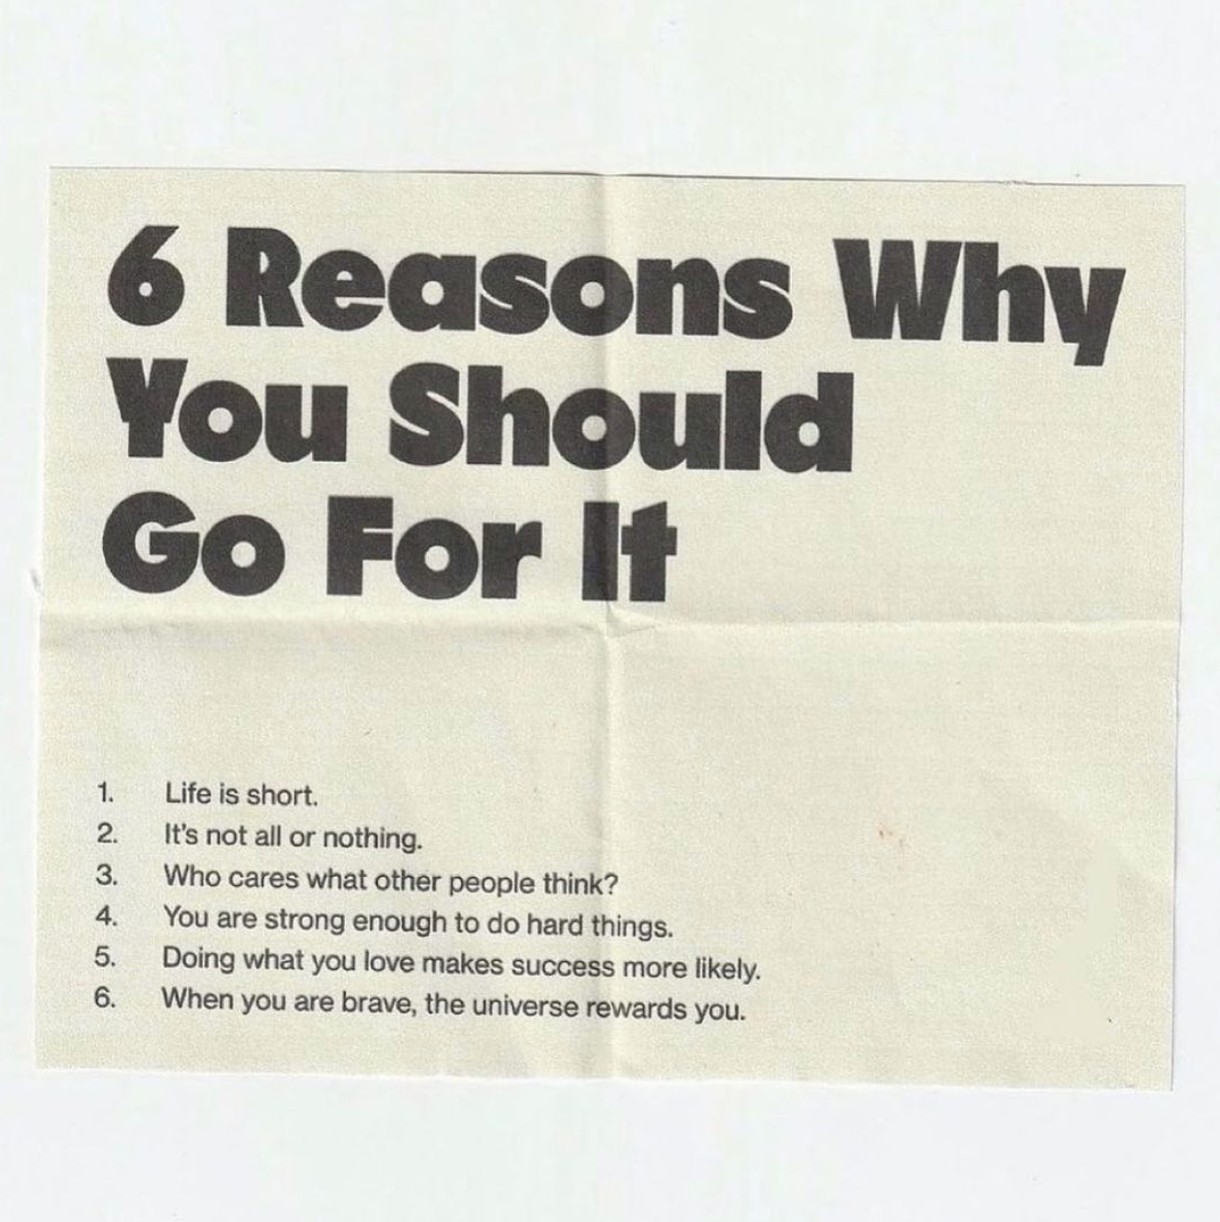 6 Reasons Why You Should Go For It